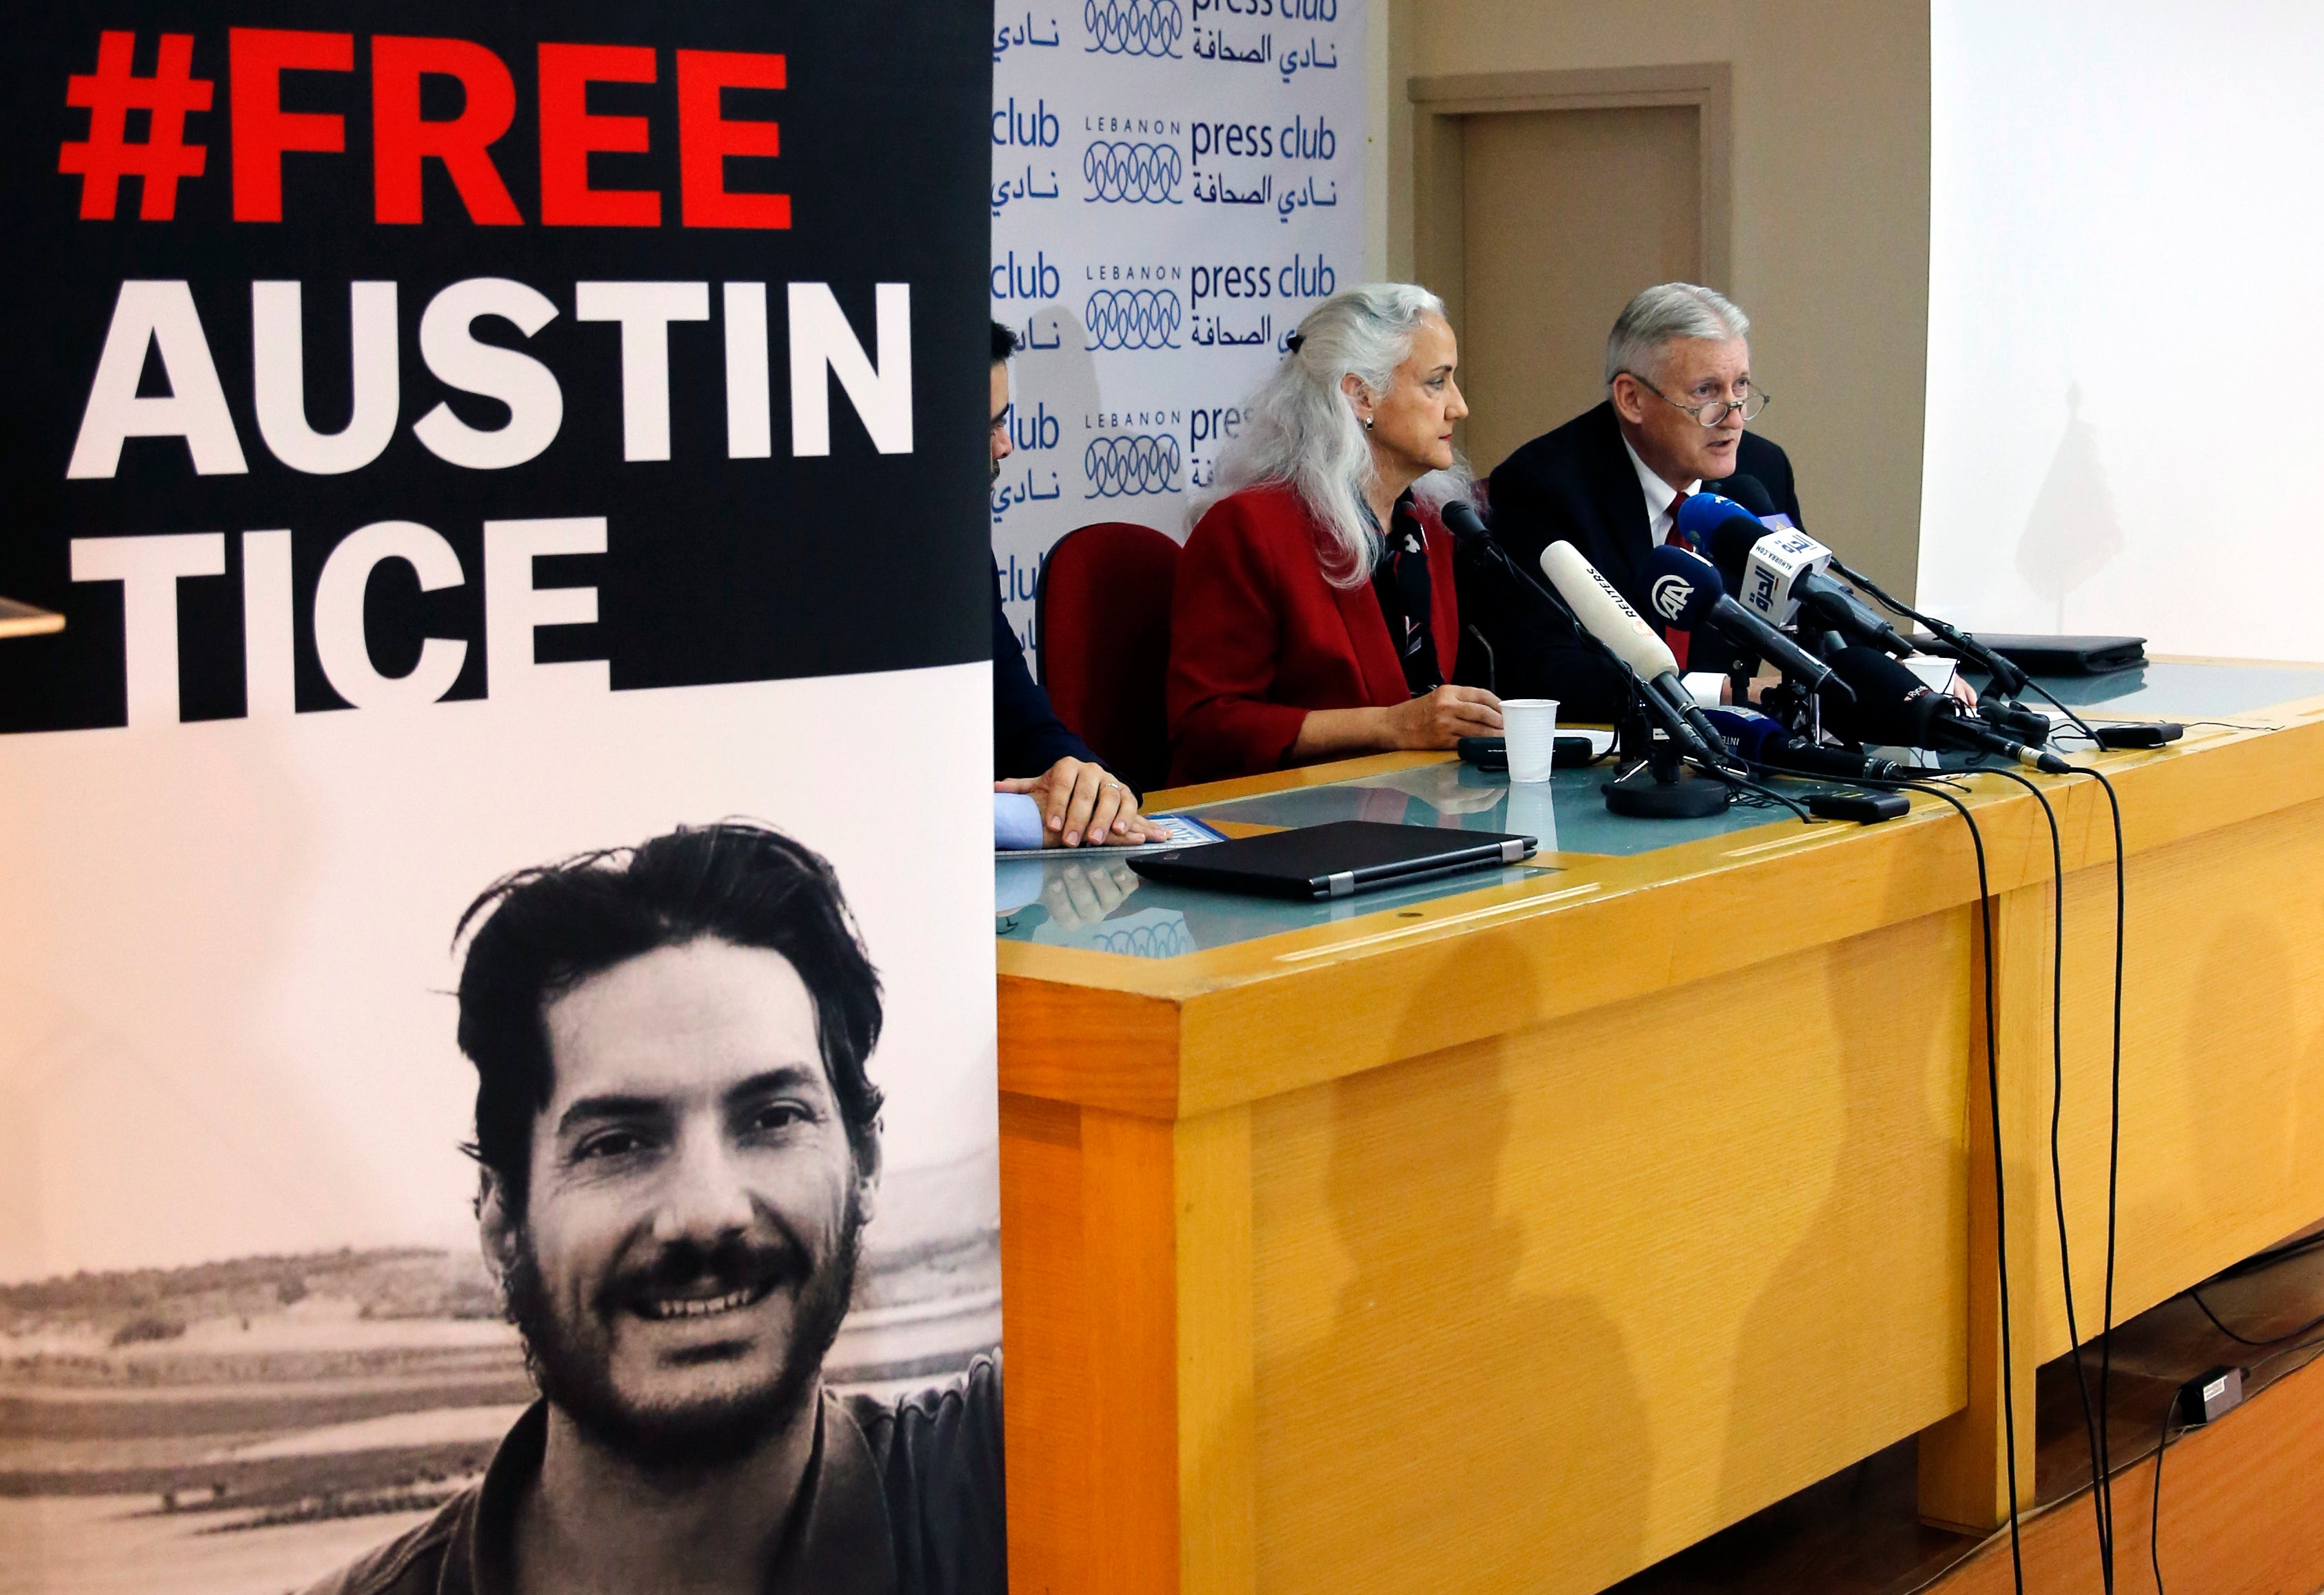 Marc and Debra Tice, the parents of Austin Tice, who is missing in Syria, speak during a press conference, at the Press Club, in Beirut, Lebanon, Dec. 4, 2018.